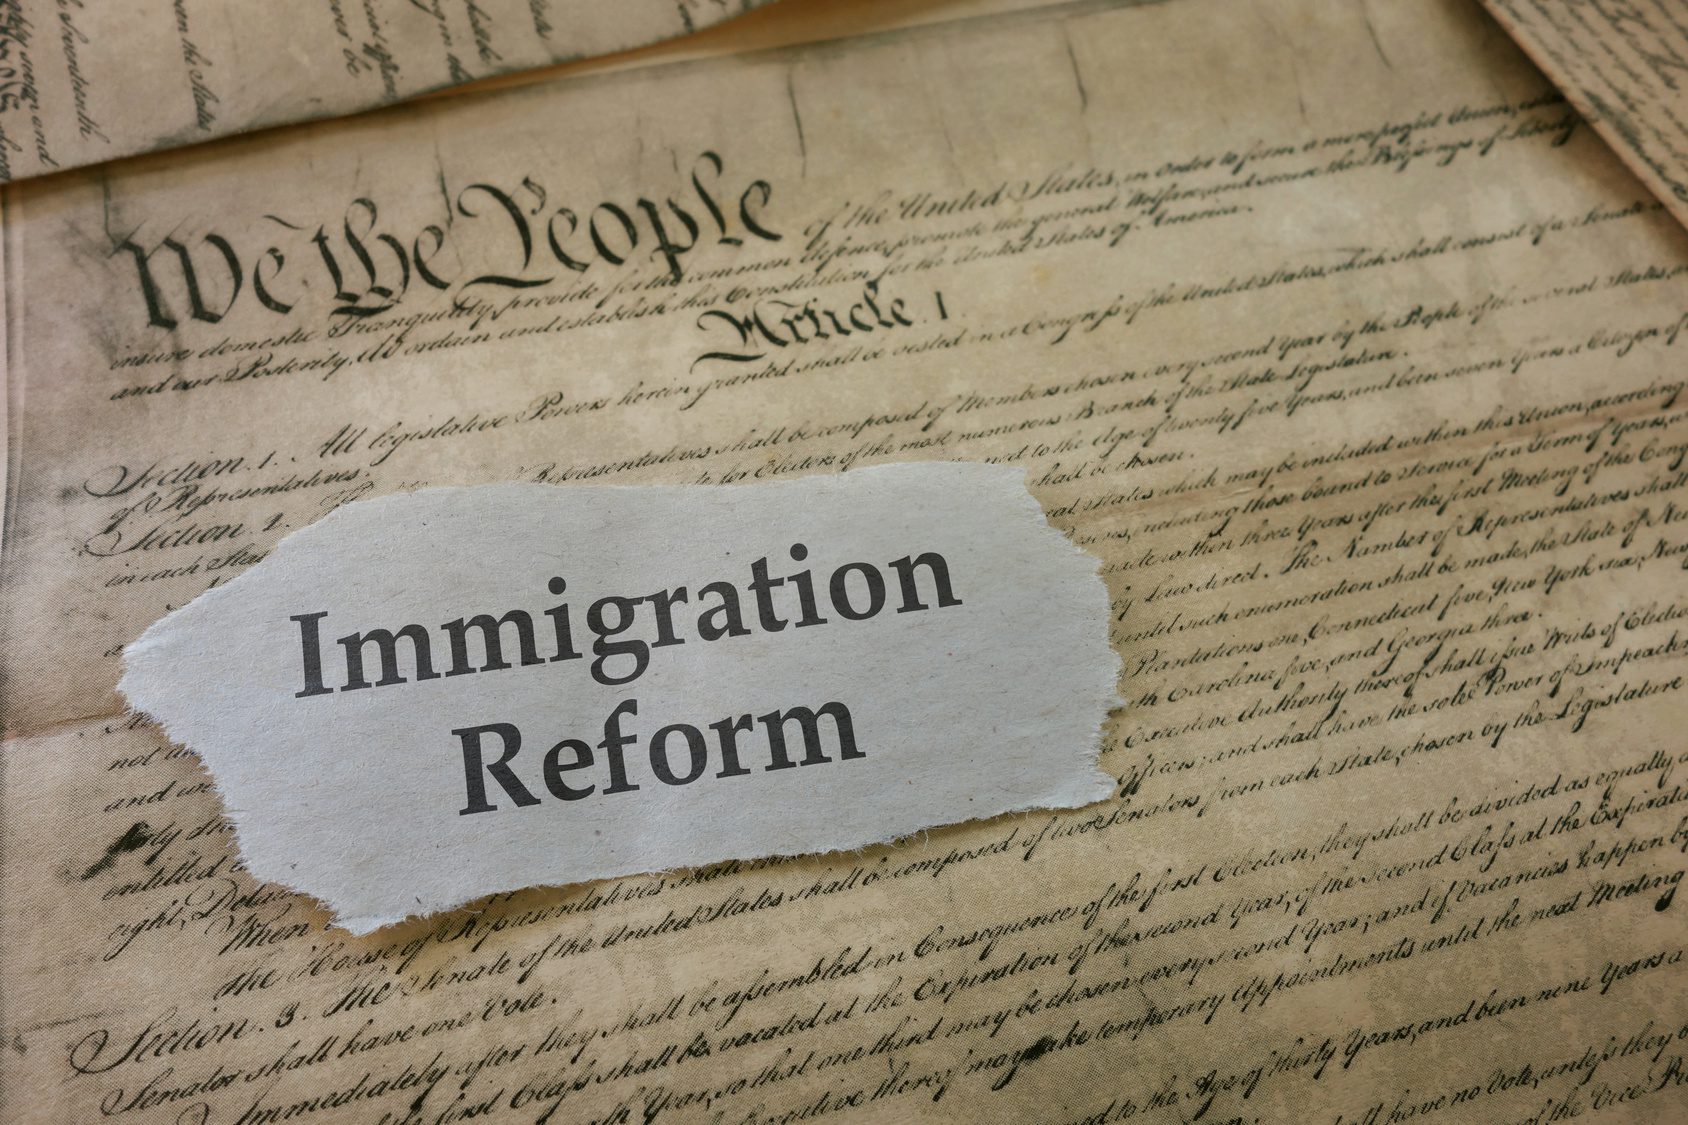 Just One More Reason to Support Comprehensive Immigration Reform